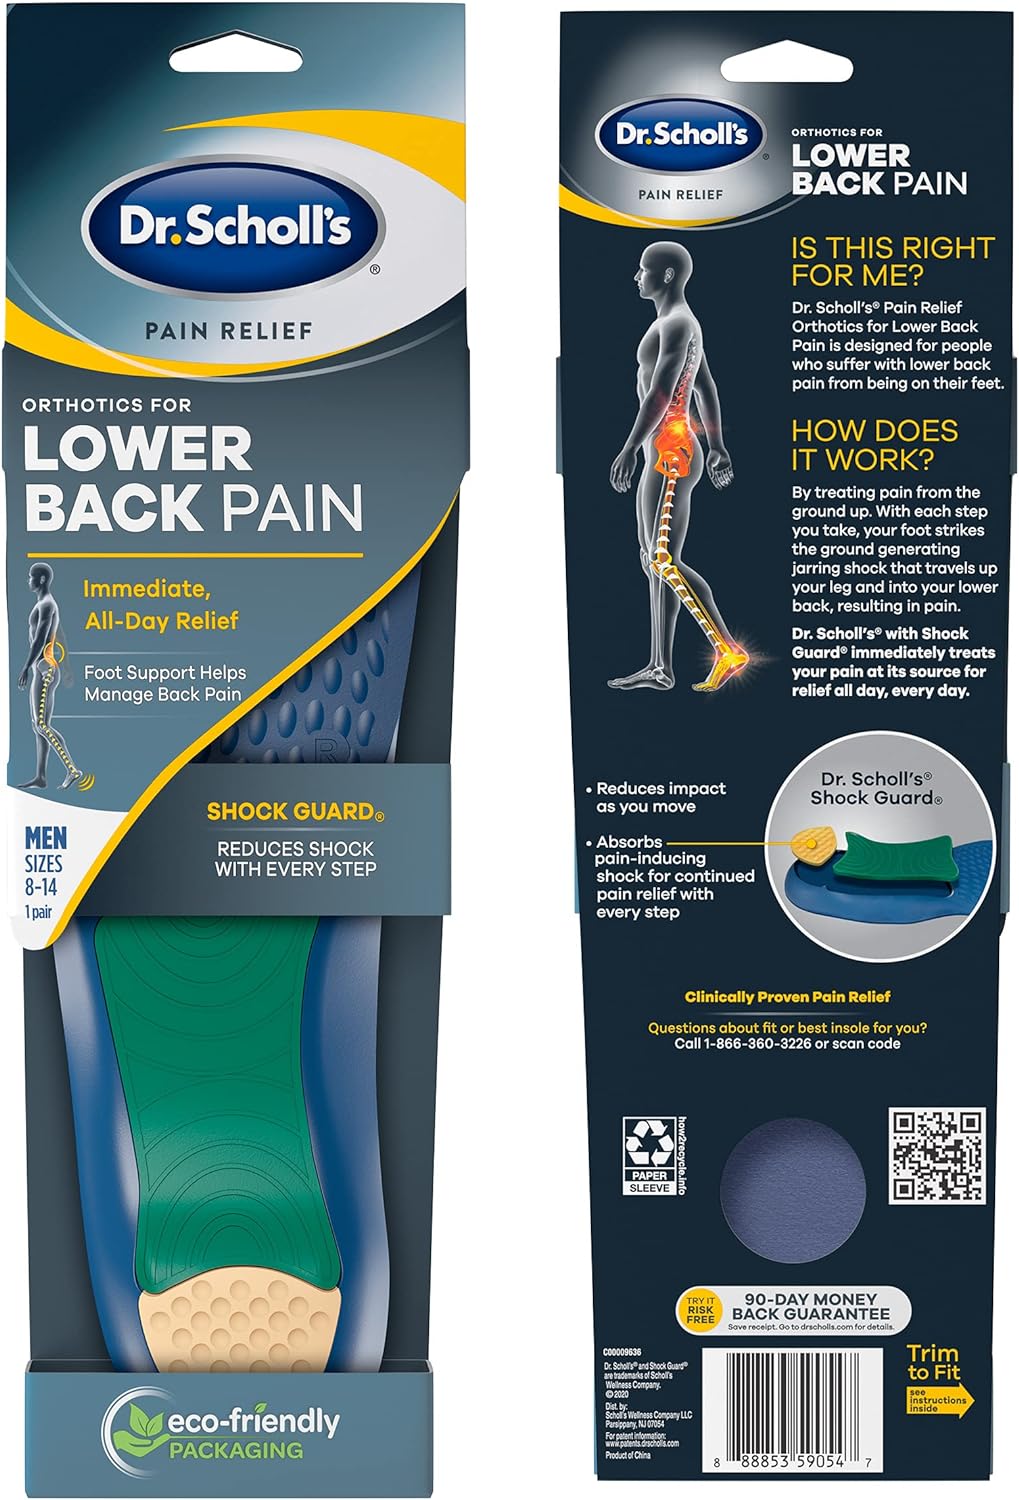 Dr. Scholl's Lower Back Pain Relief Orthotics // Clinically Proven Immediate and All-Day Relief of Lower Back Pain - Men's 8-14